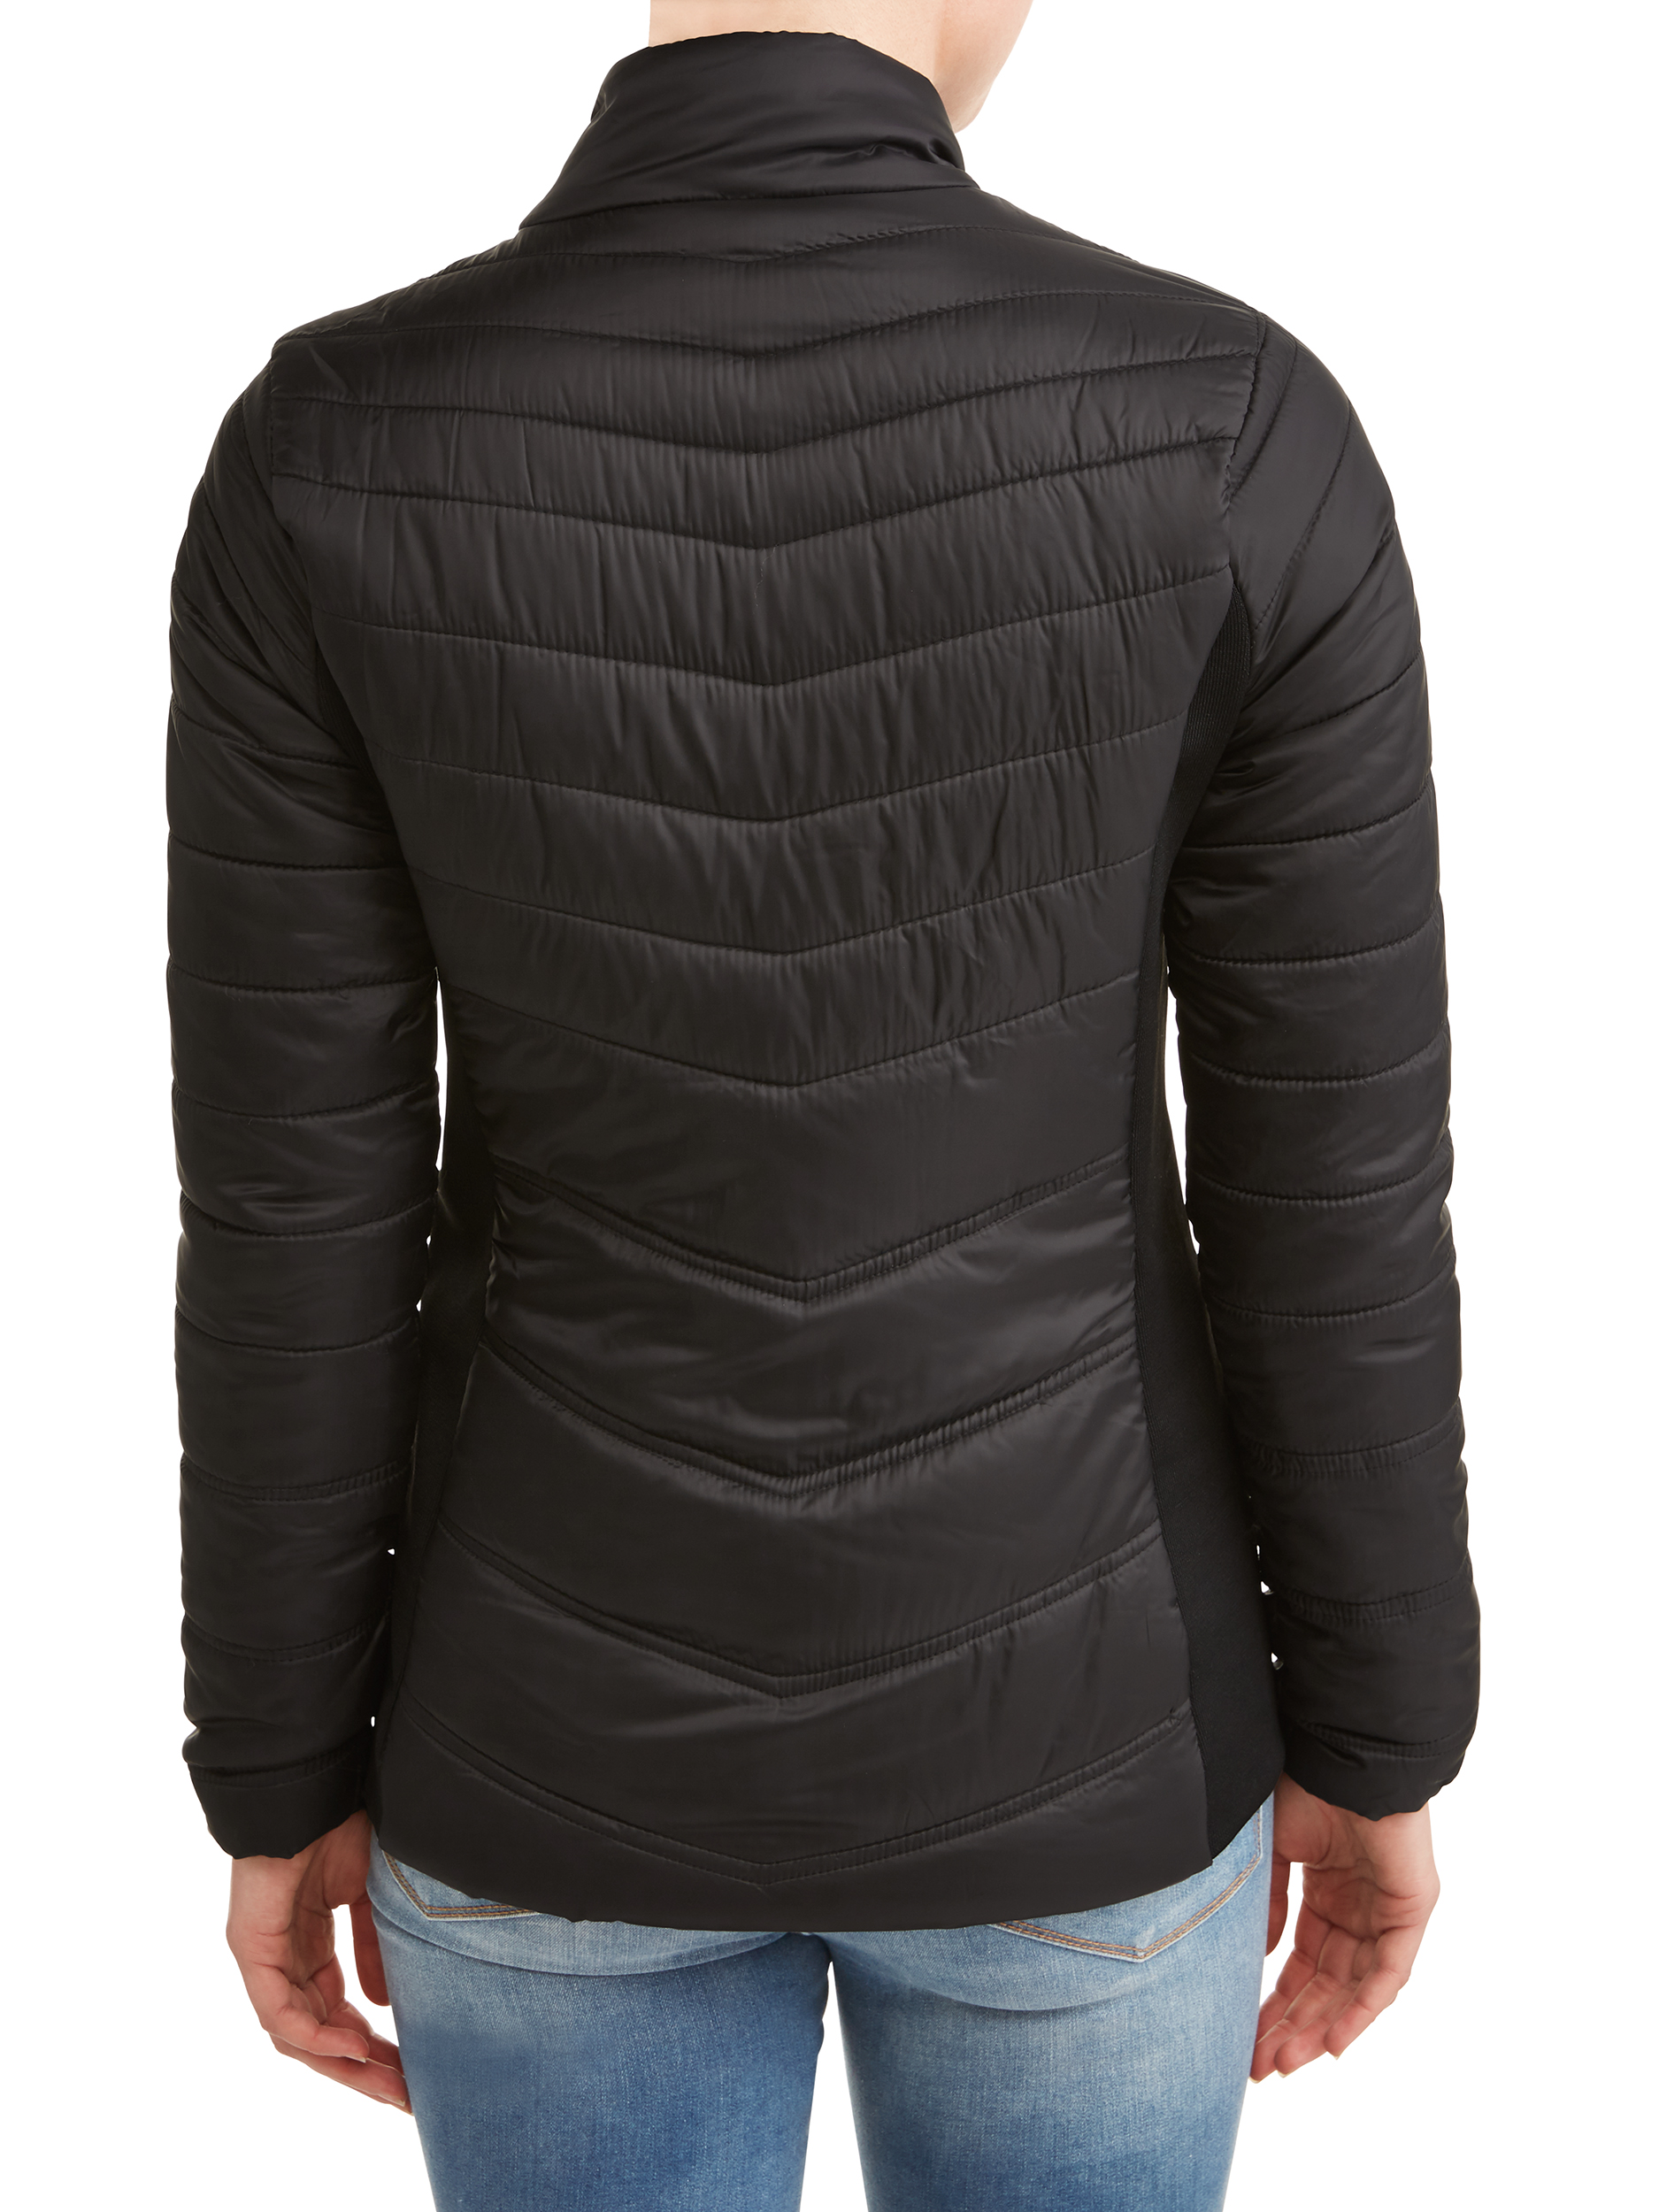 Women's Active Quilted Puffer Jacket - image 3 of 4